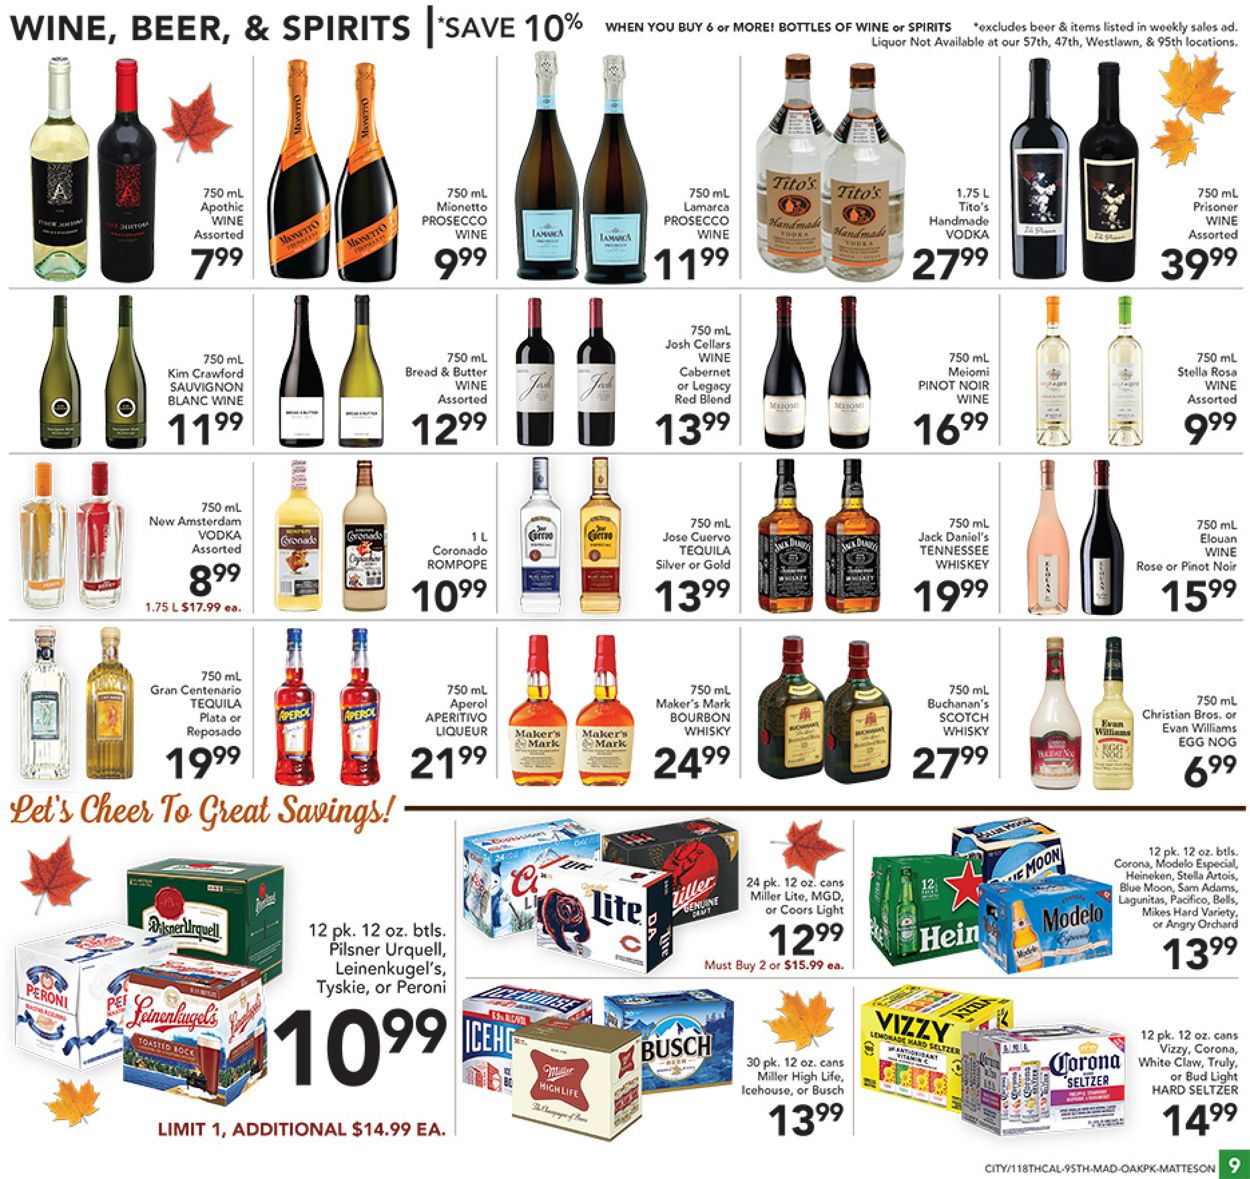 Pete's Fresh Market THANKSGIVING 2021 Weekly Ad Circular - valid 11/17-11/25/2021 (Page 9)